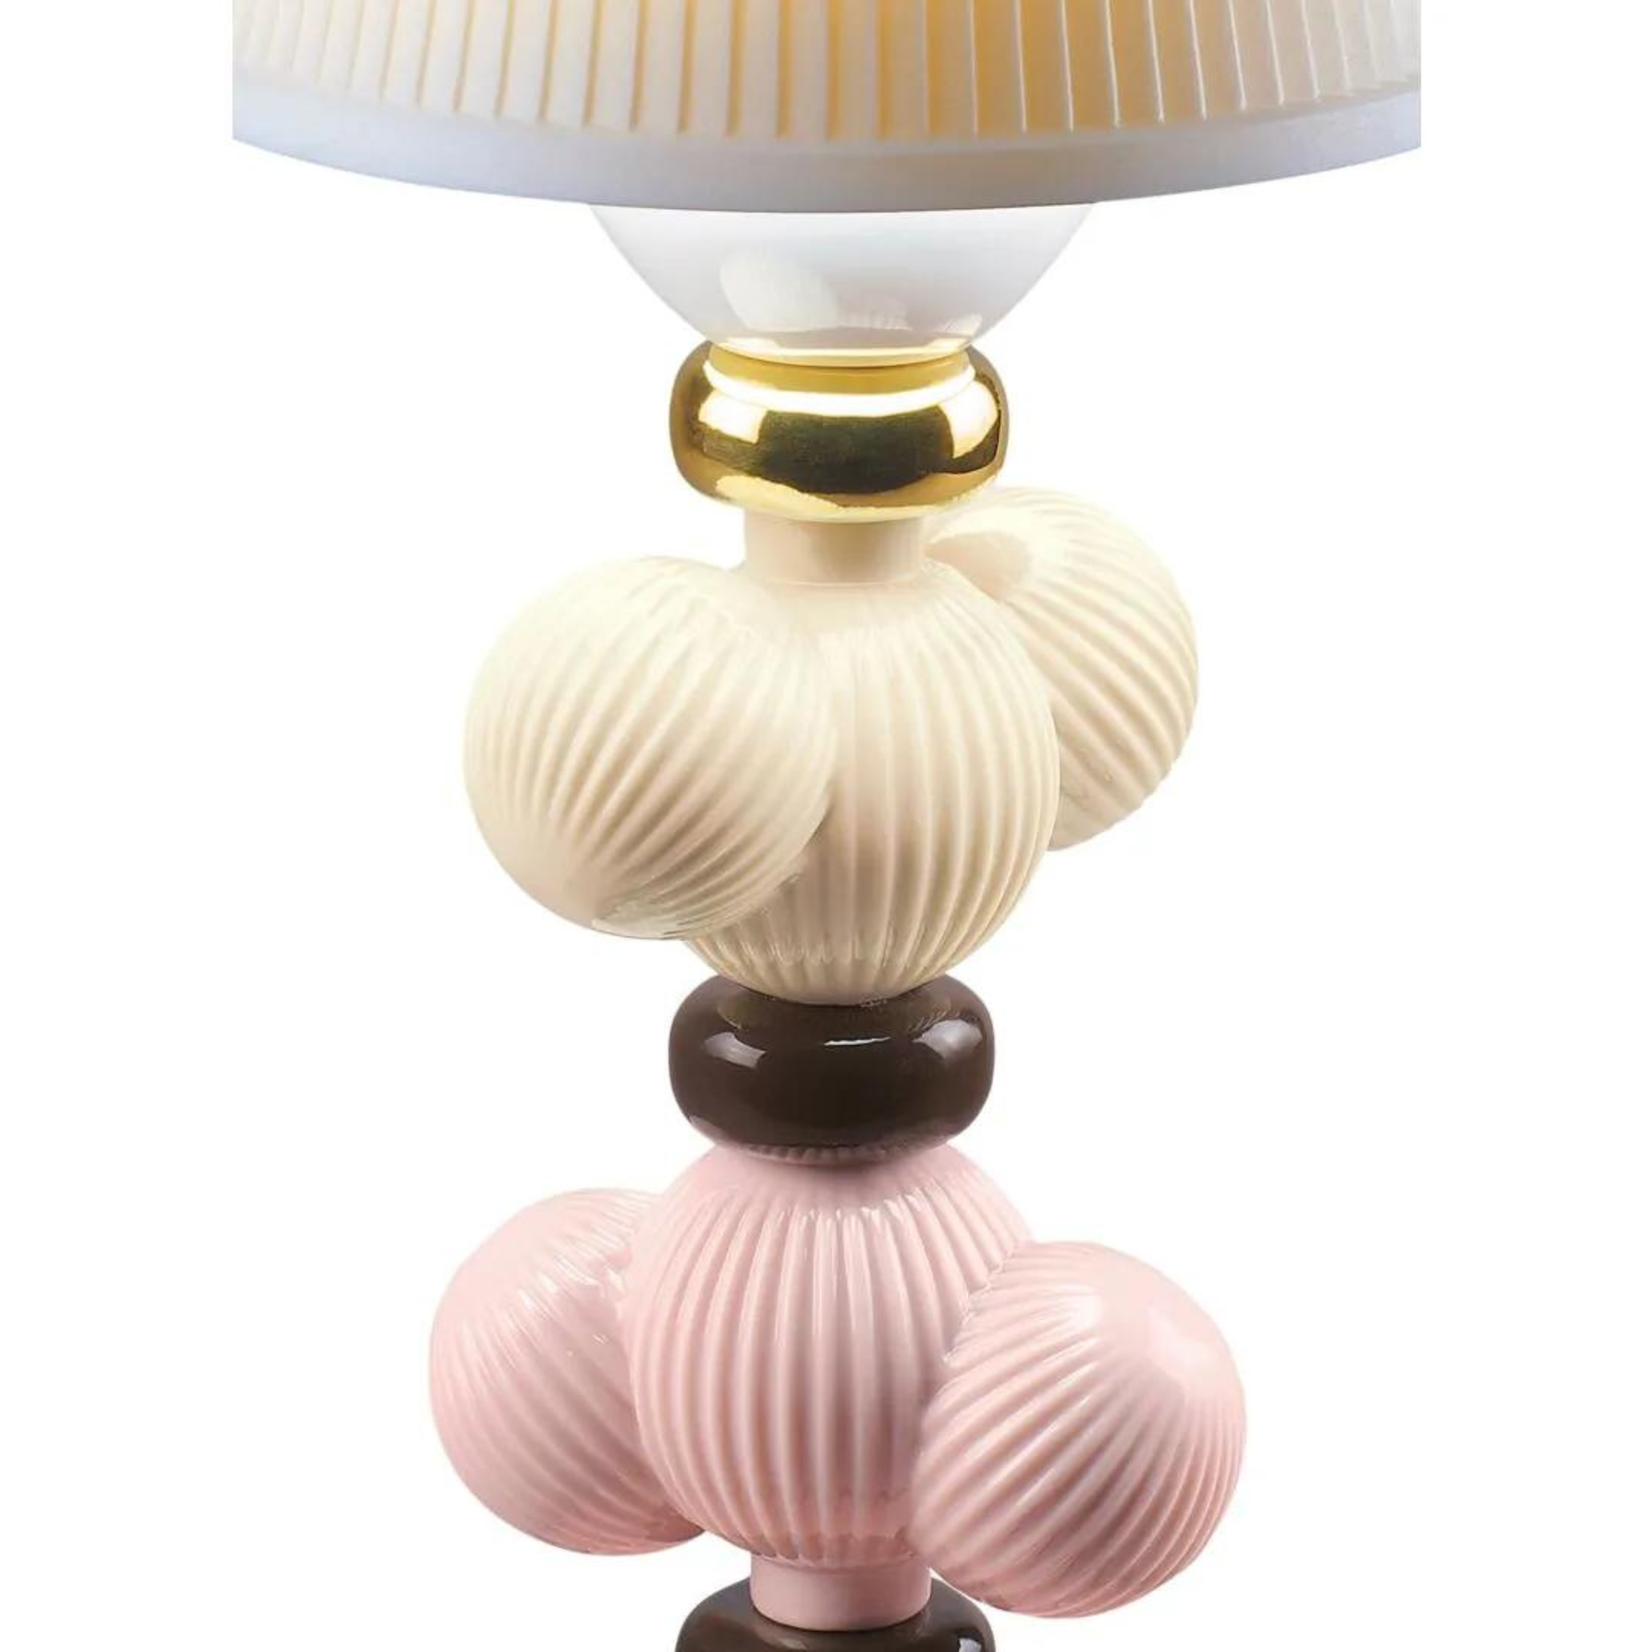 Lladro Cactus Firefly Golden Fall Table Lamp -Pink